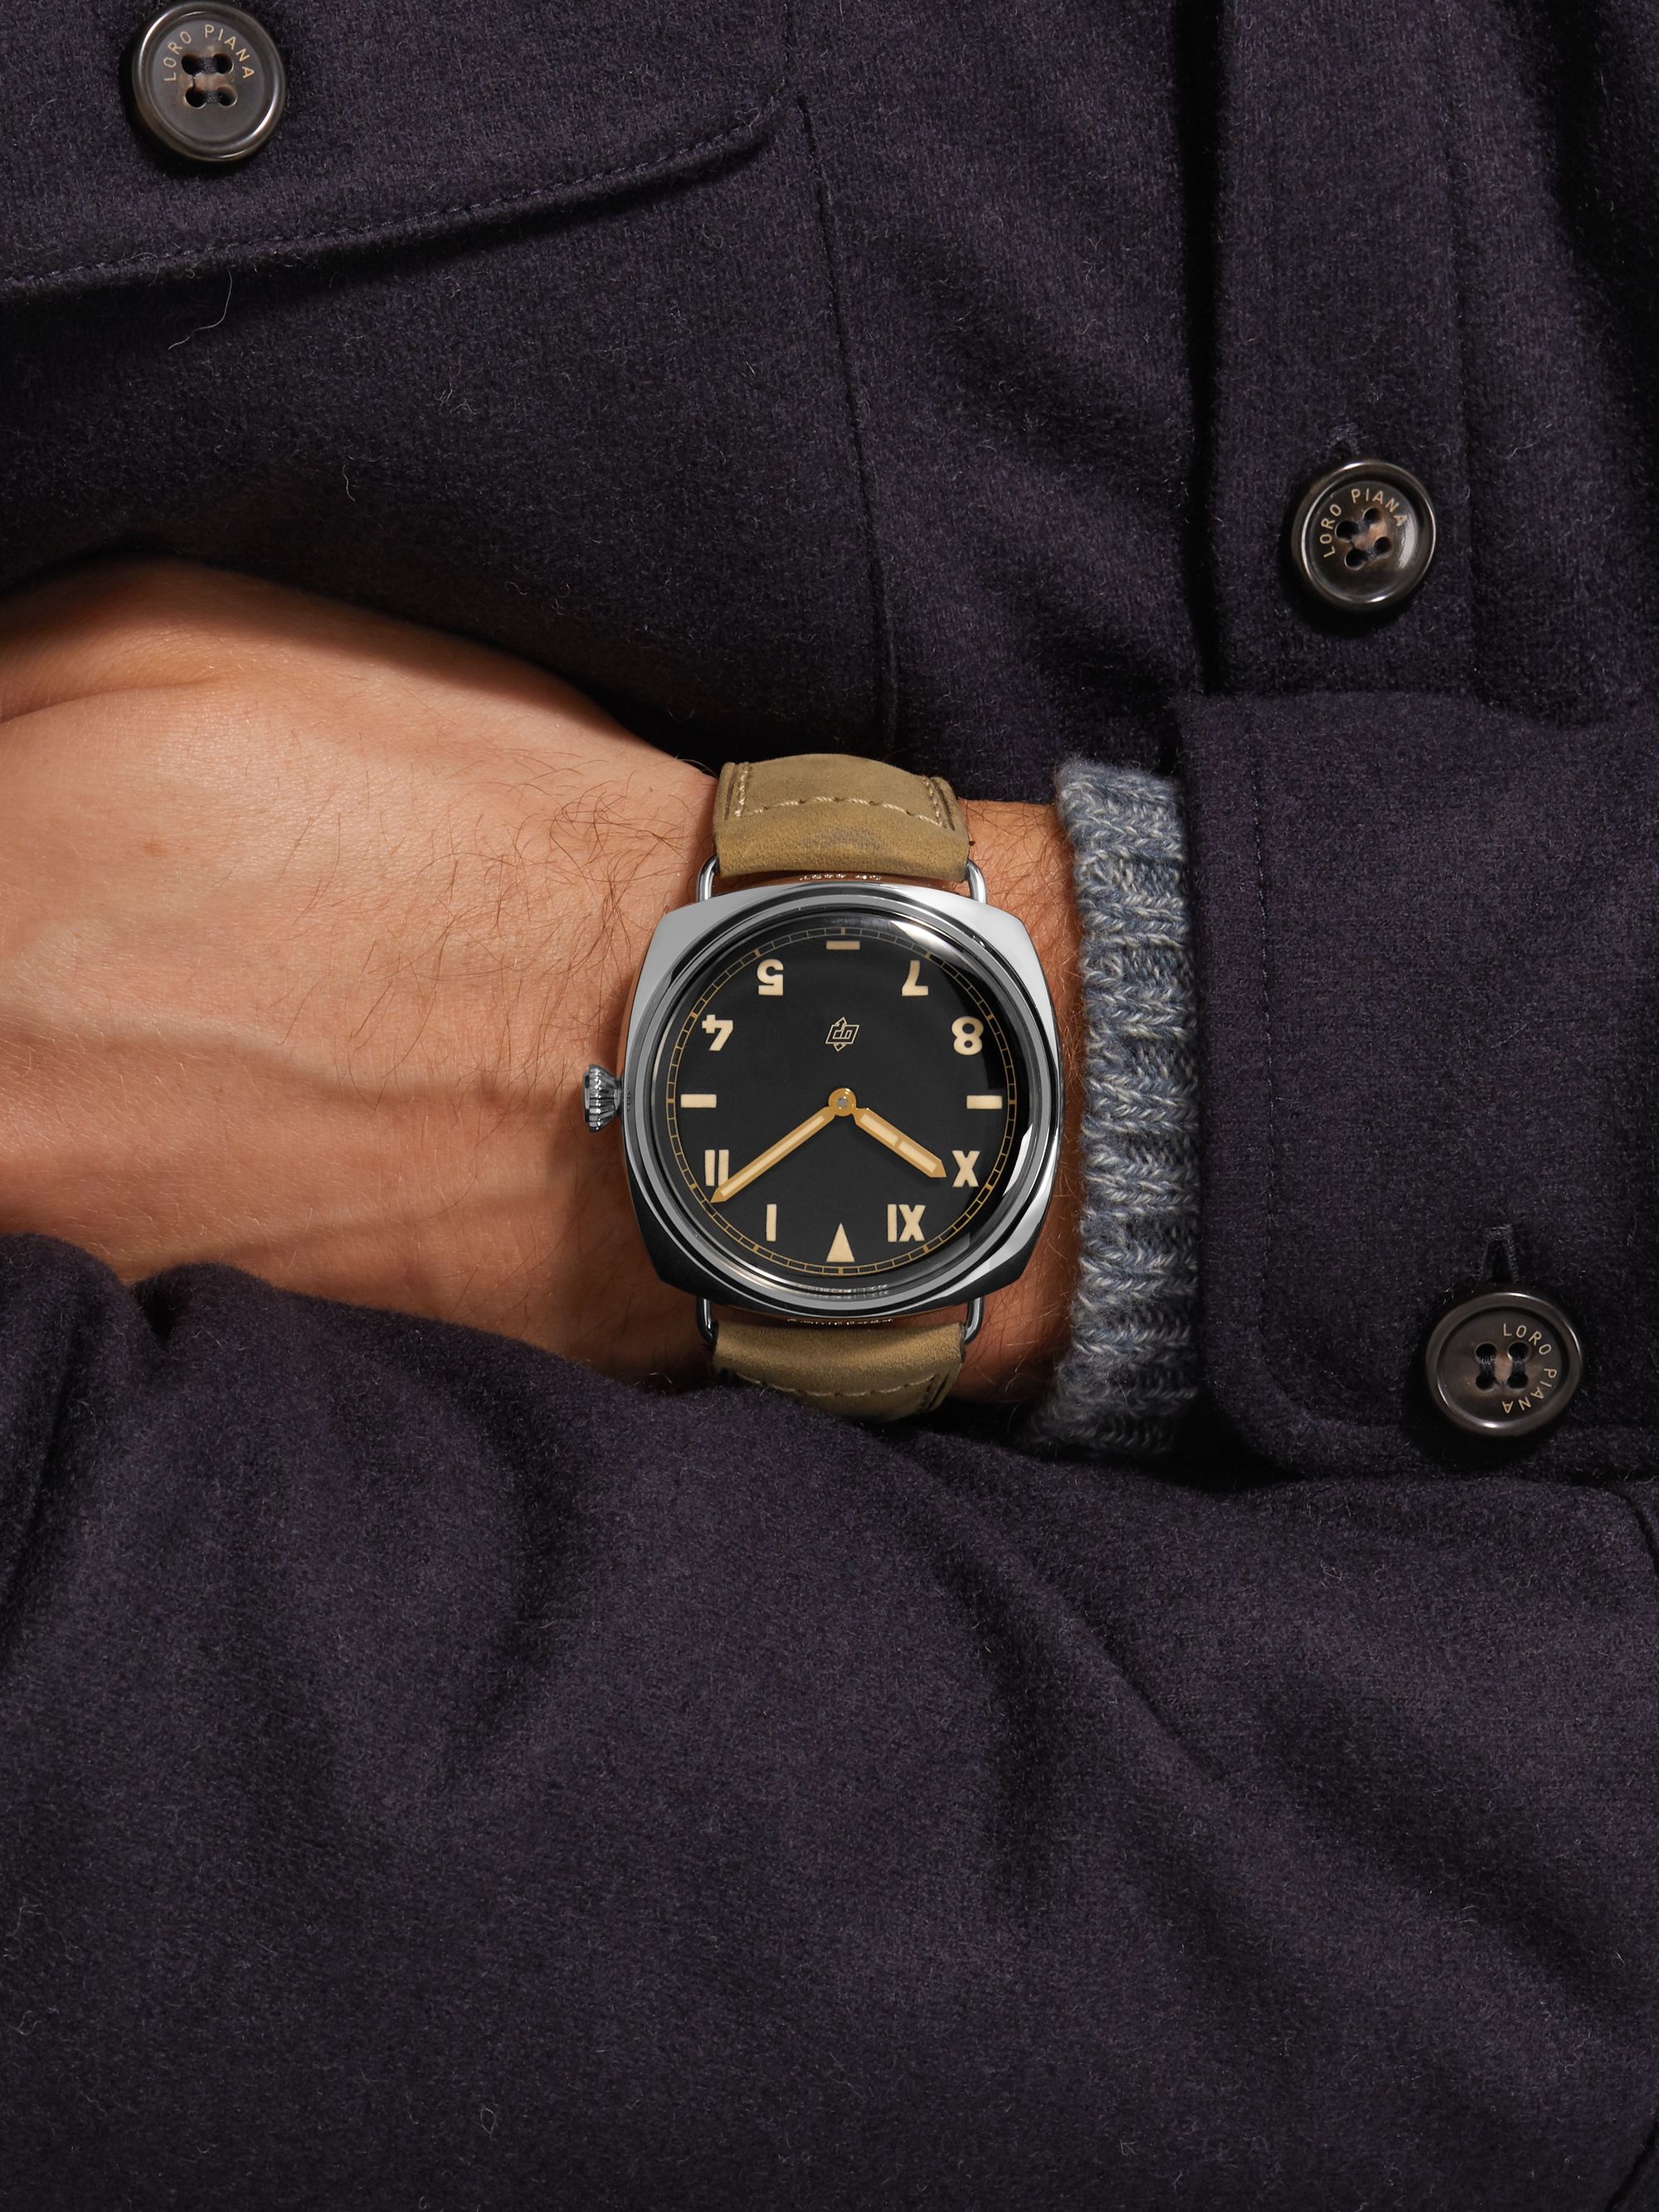 PANERAI Radiomir California Hand-Wound 47mm Stainless Steel and Leather Watch, Ref. No. PAM00424